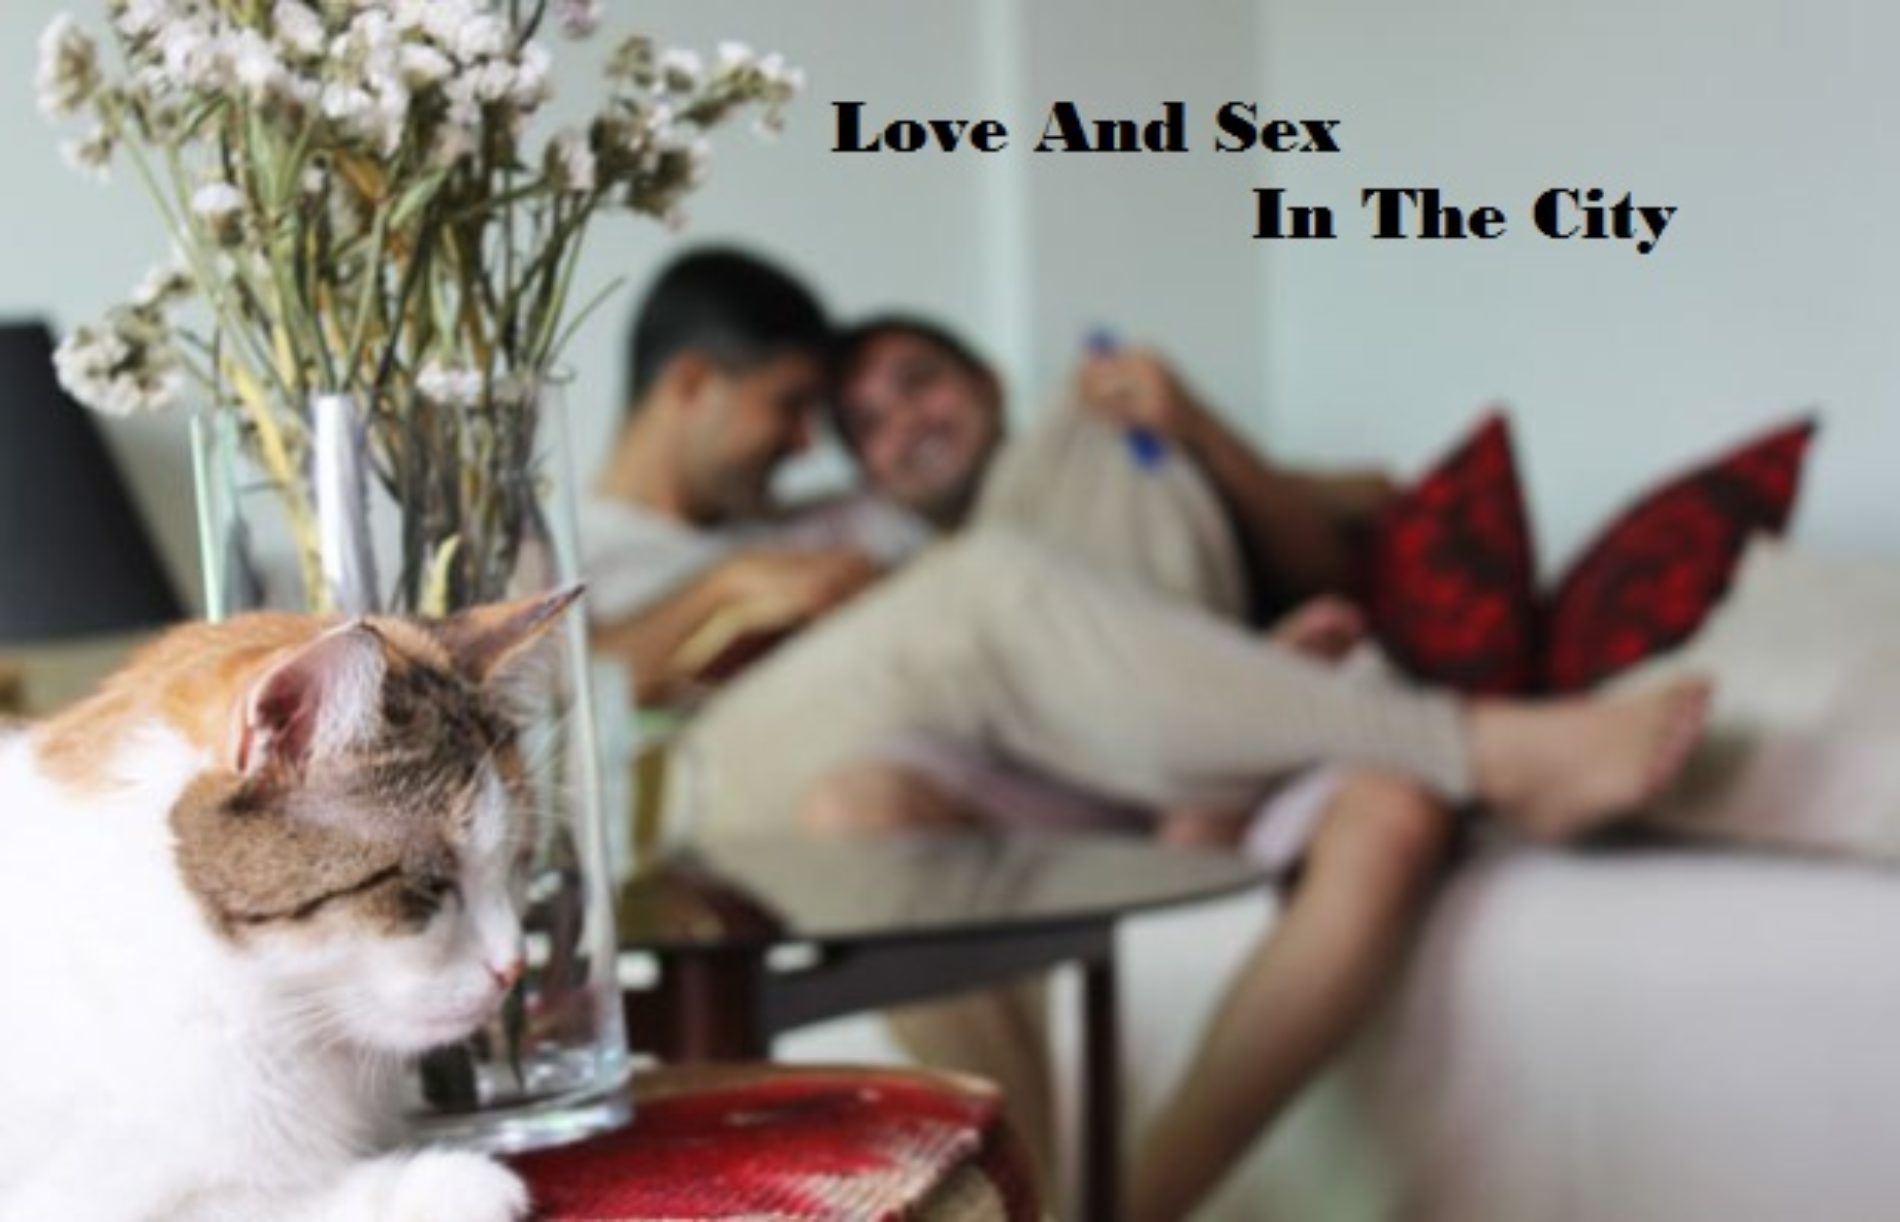 LOVE AND SEX IN THE CITY (Episode 59)